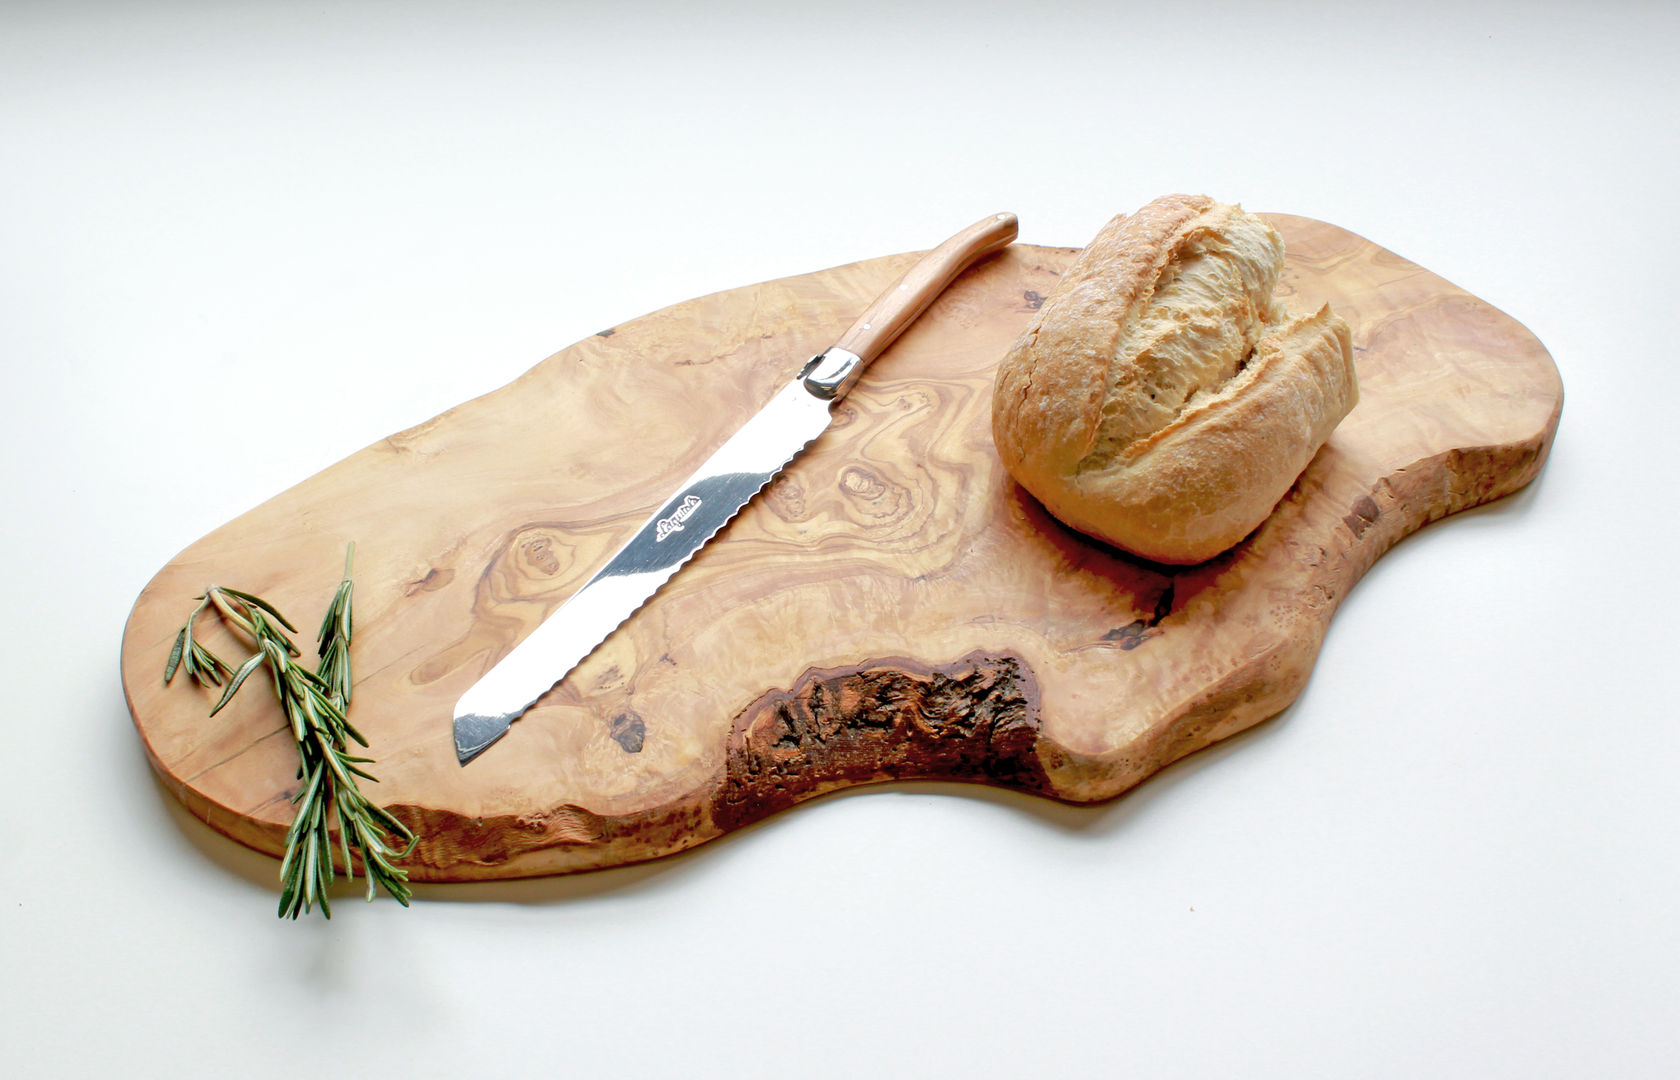 Large Rustic Olive Wood Serving Board, The Rustic Dish The Rustic Dish 러스틱스타일 주방 주방 용품